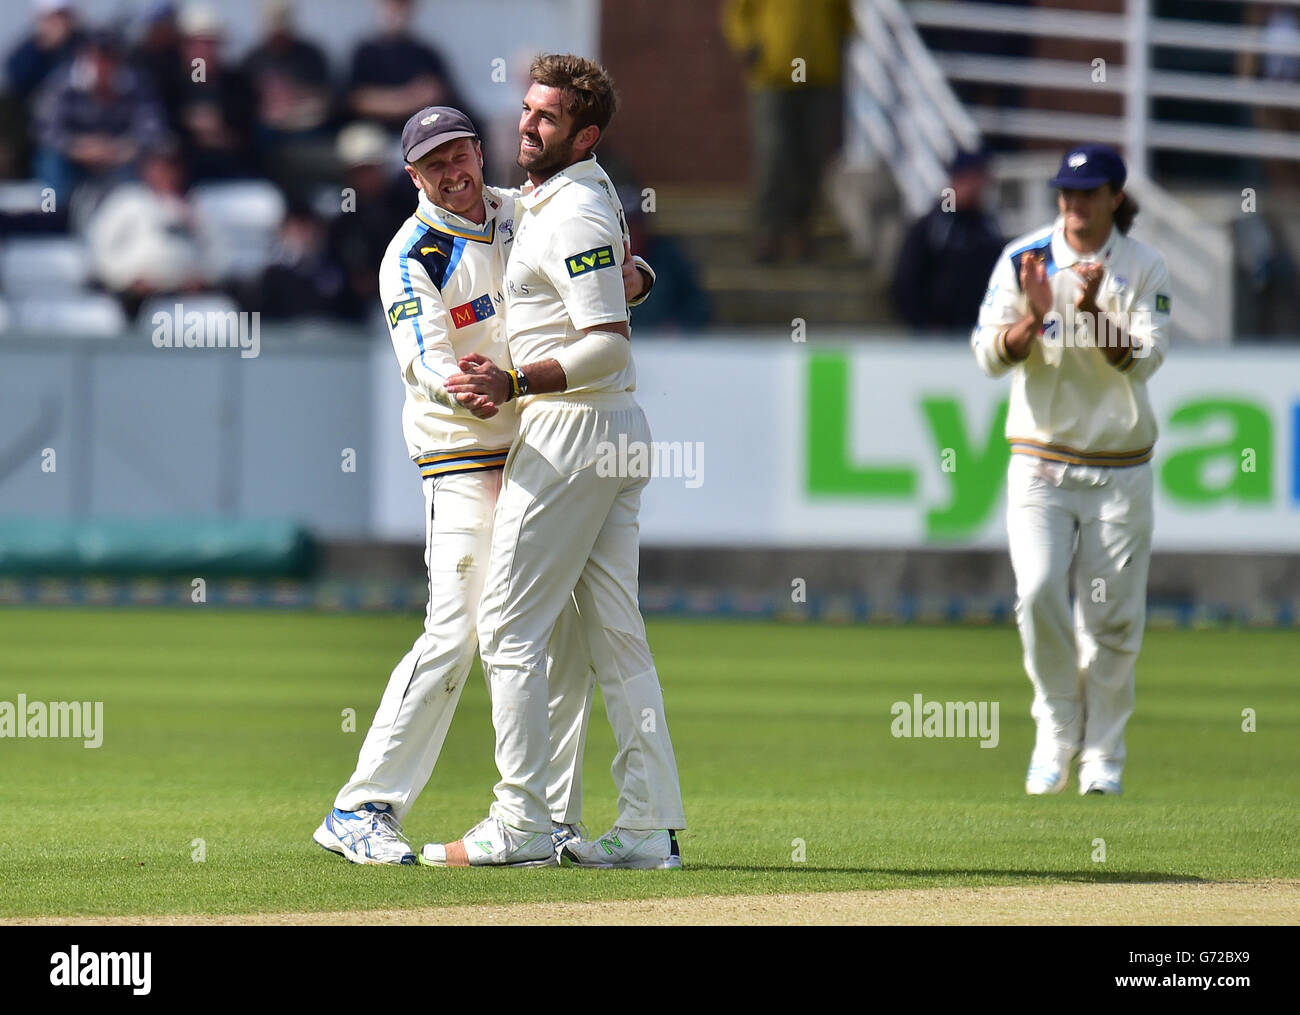 Yorkshire's Liam Plunkett celebrates the wicket of Durham's Mark Stoneman during the LV=County Championship Division One match at the Emirates Durham ICG, Chester-Le-Street. Stock Photo